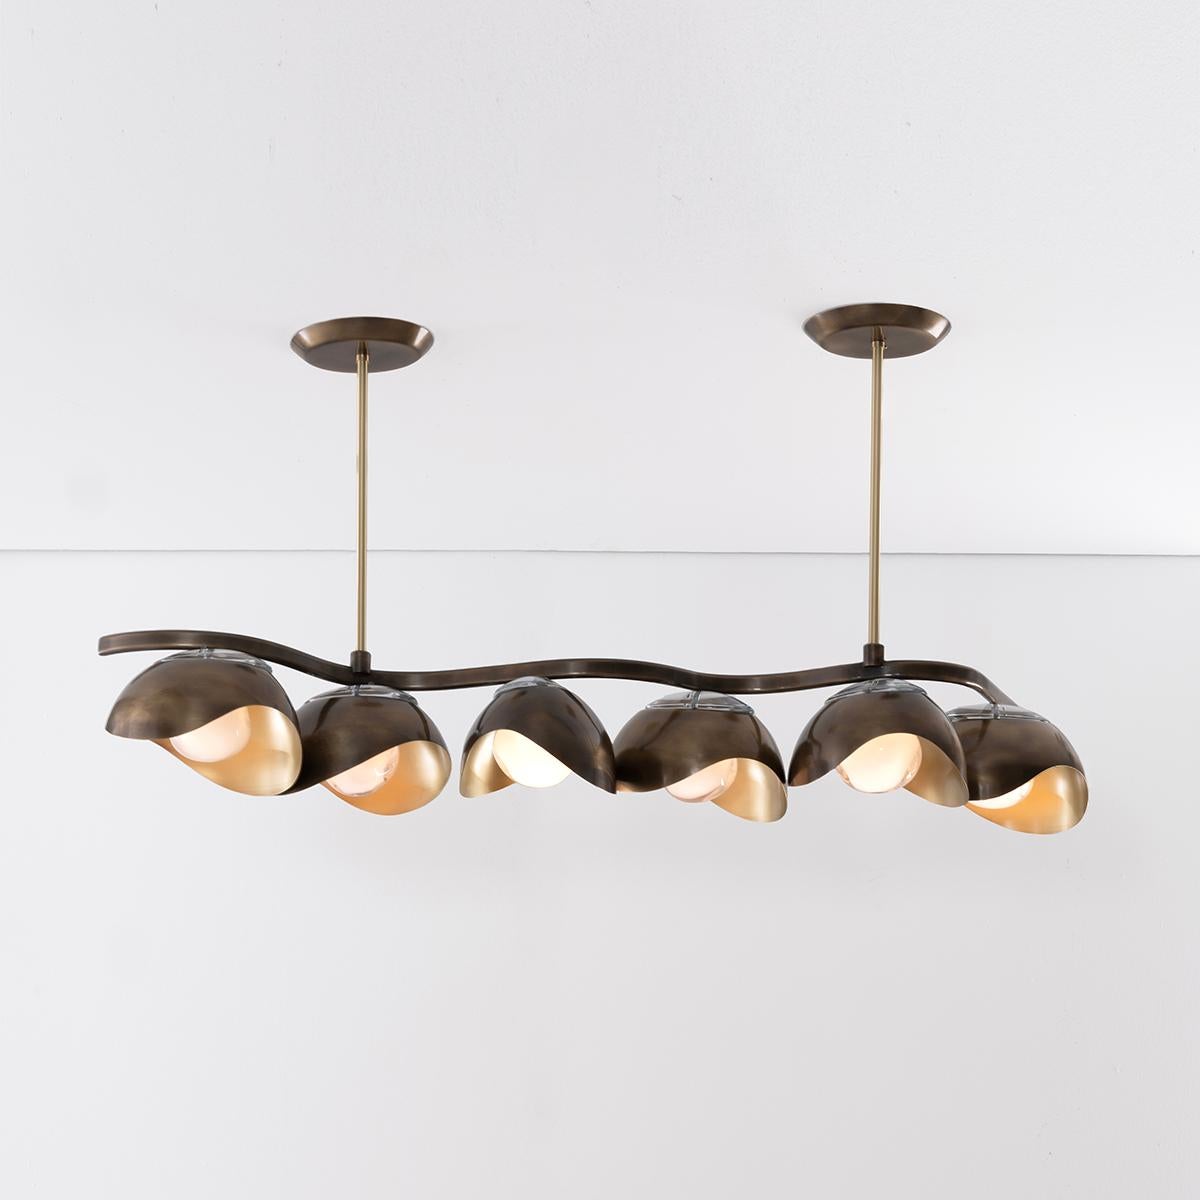 Serpente Ceiling Light by Gaspare Asaro- Polished Nickel and Satin Brass Finish For Sale 1